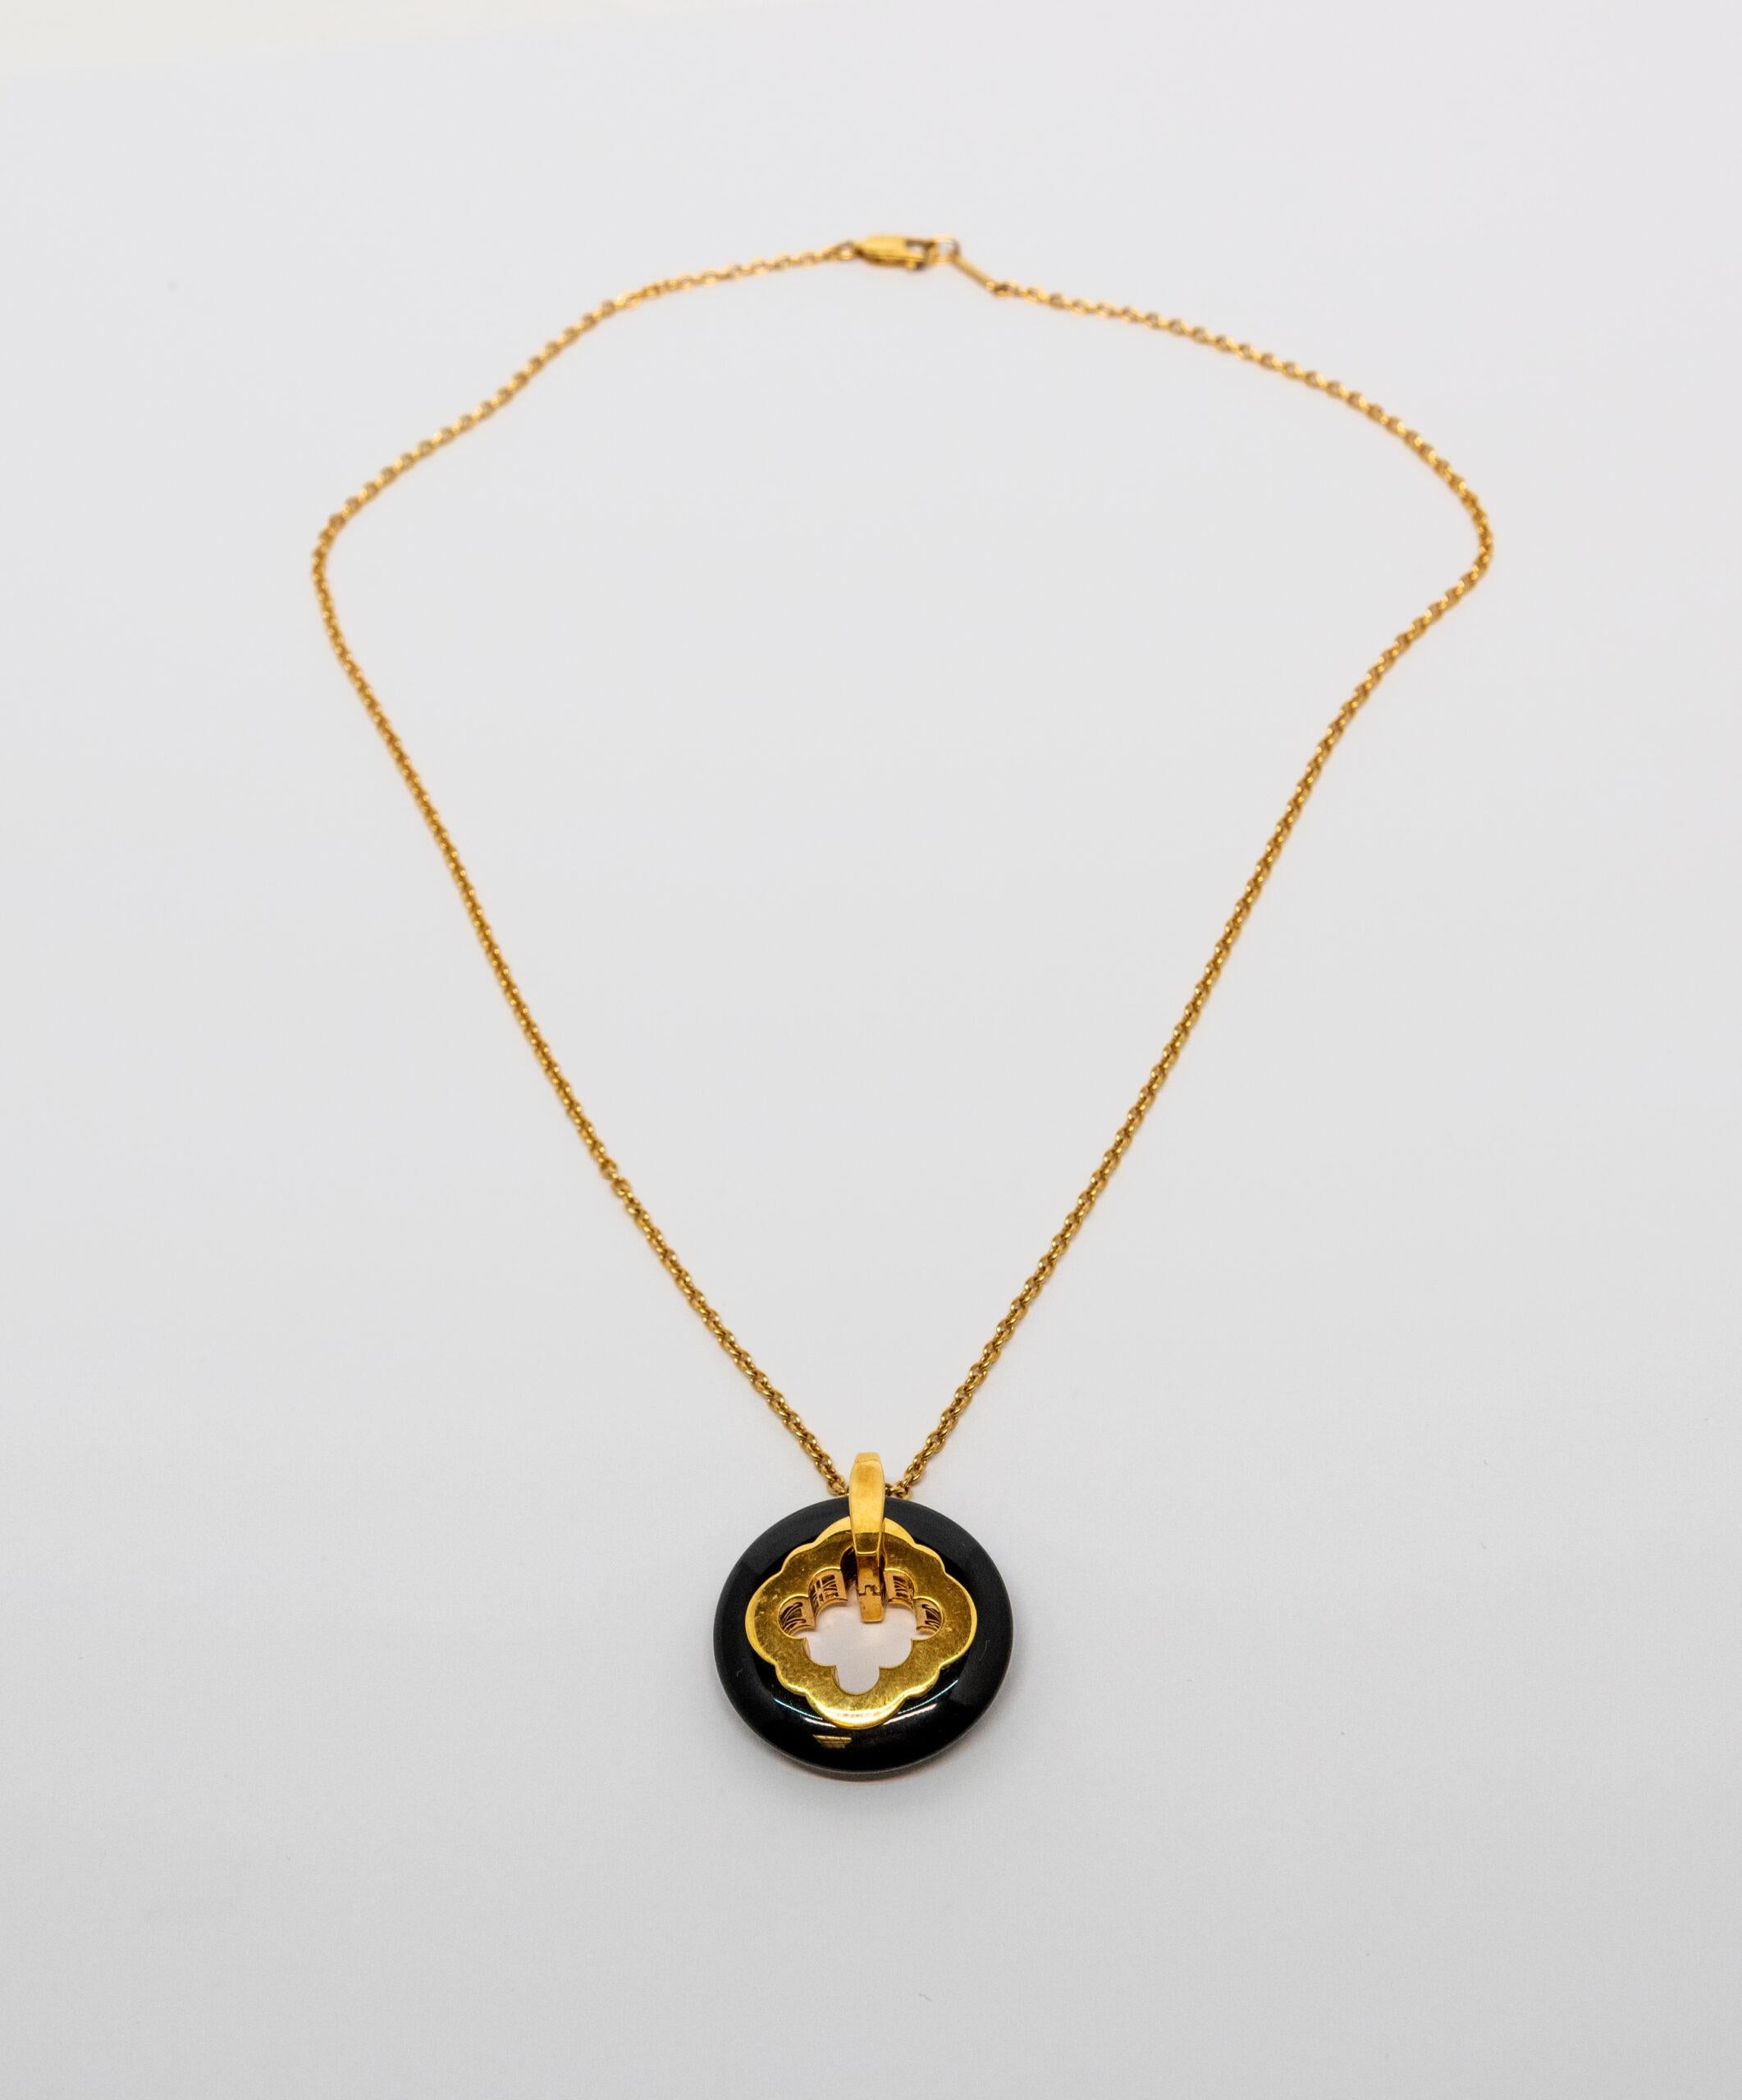 18K Yellow Gold and Black Onyx pendant. 18K Yellow Gold cable chain with lobster claw lock. The pendant is made of Black Onyx disk and 18K Yellow Gold insert in the middle.

Chain Length: 22.5 cm
Pendant dimensions: 3 x 3 cm